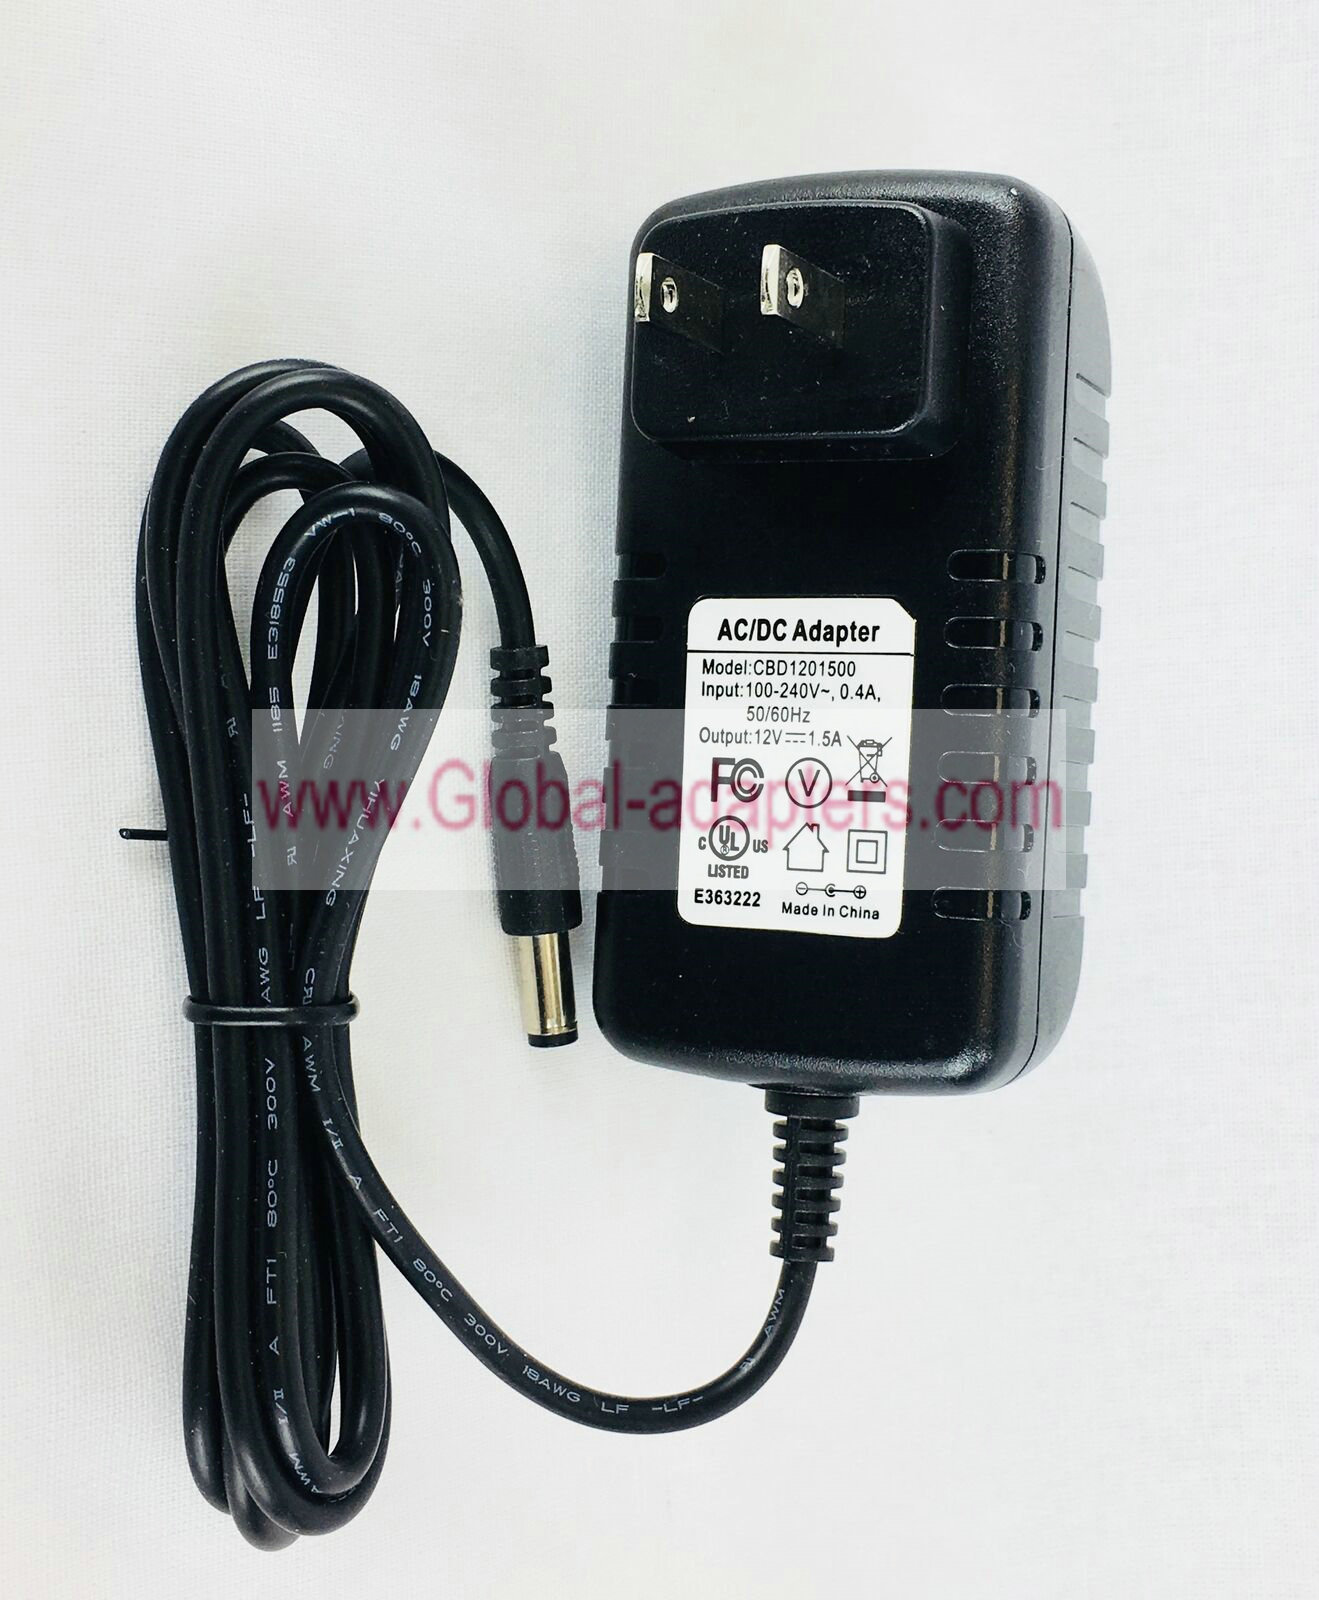 Brand New 12V 1.5A AC/DC Adapter for CBD1201500 Power Supply